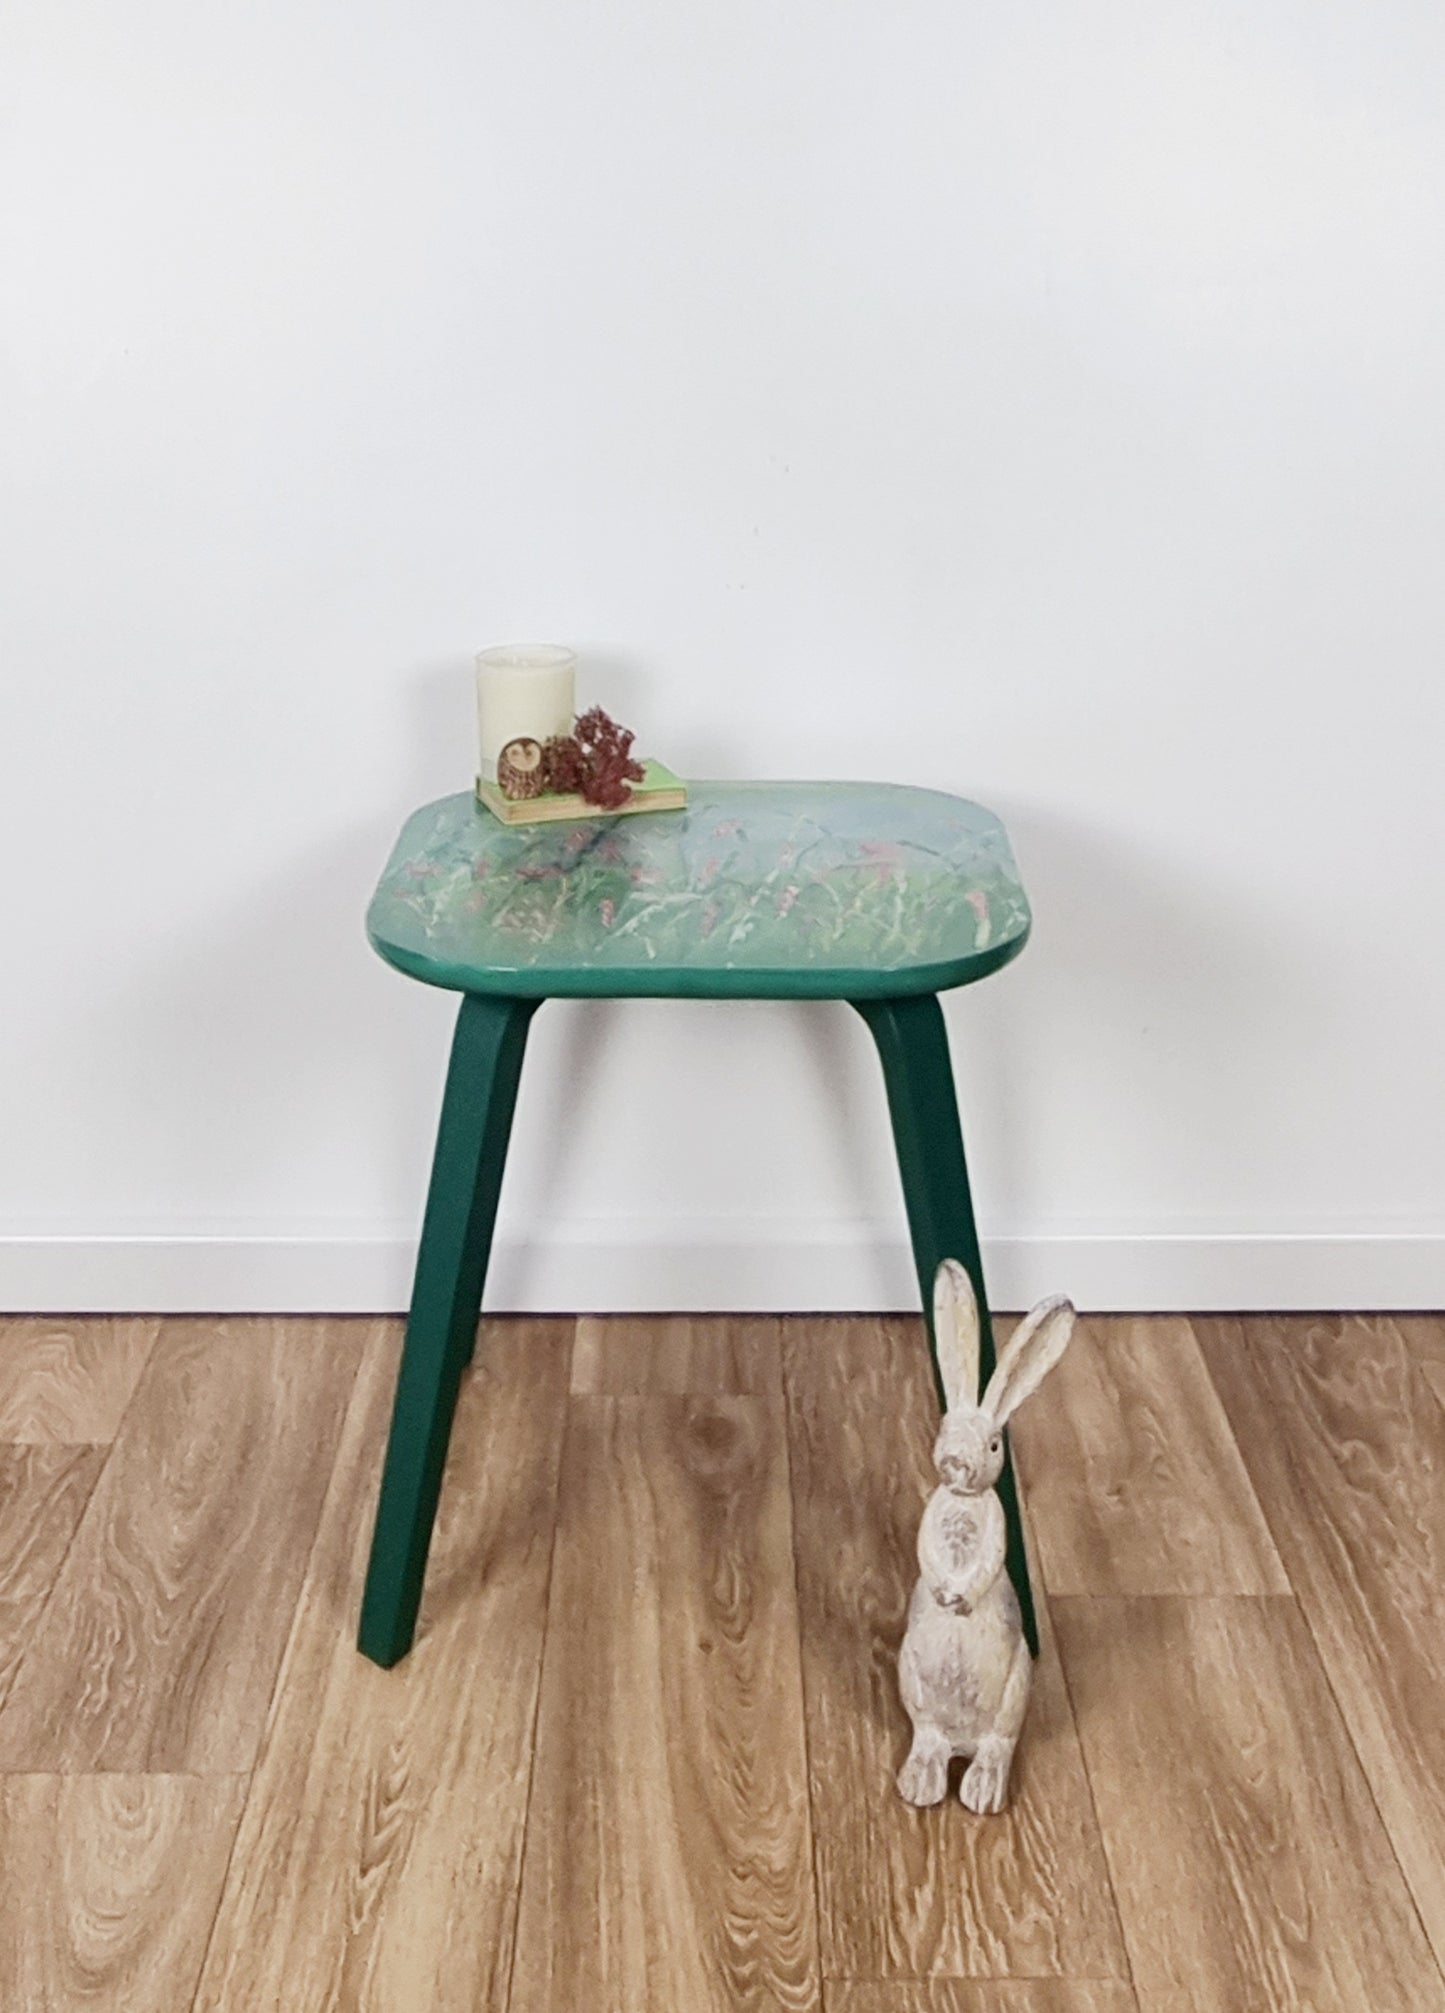 Hand painted floral side table legs painted in green with pretty flowers on the top